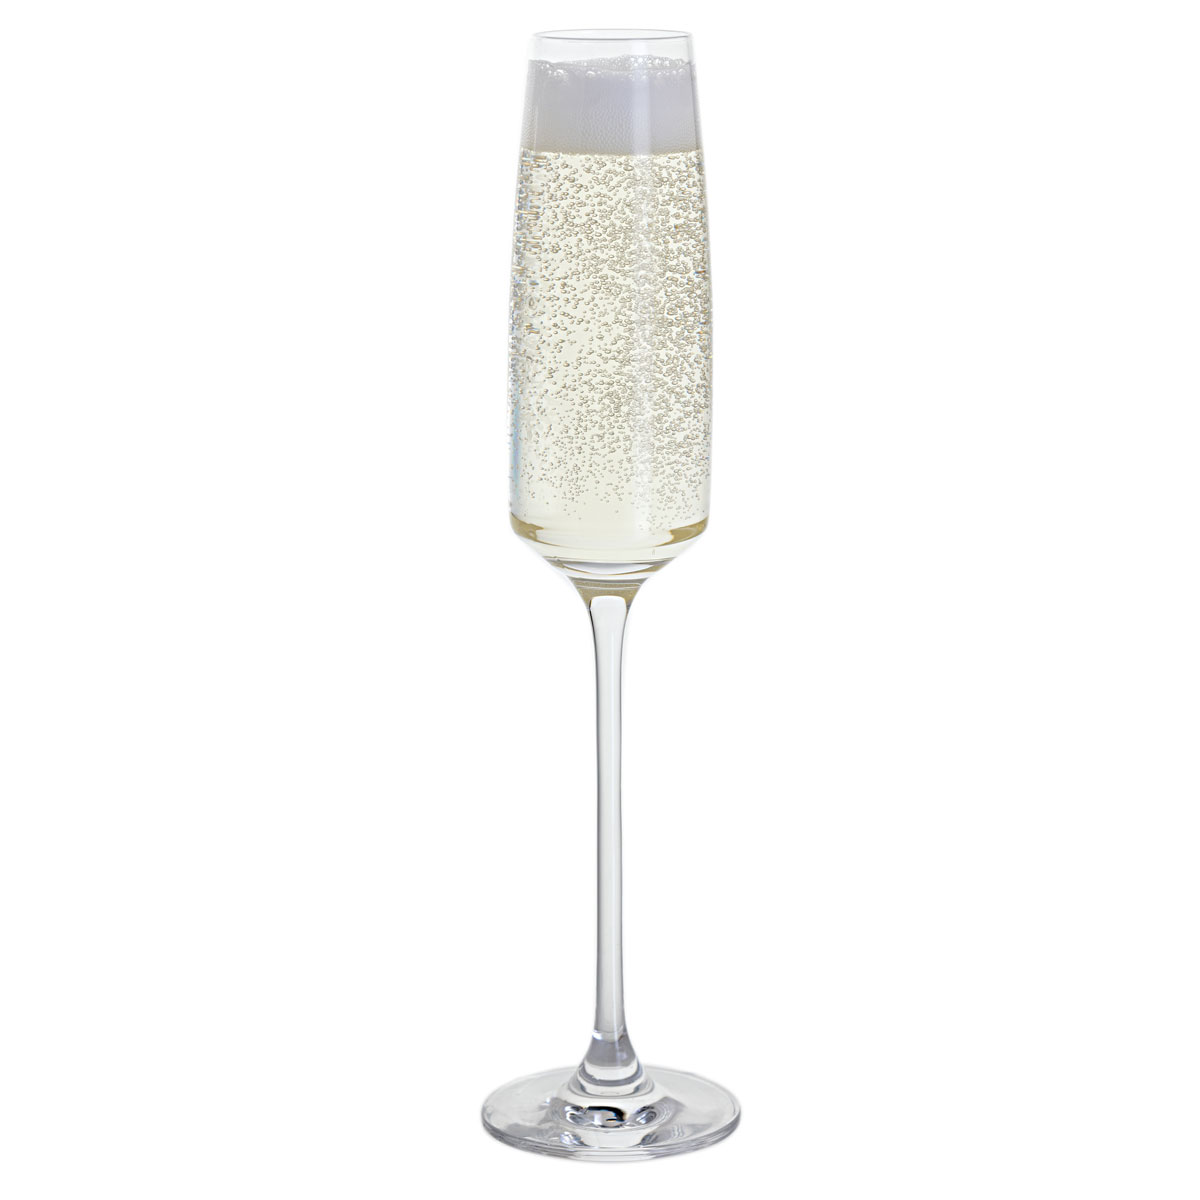 For the Best Champagne Flutes, Materials Matter